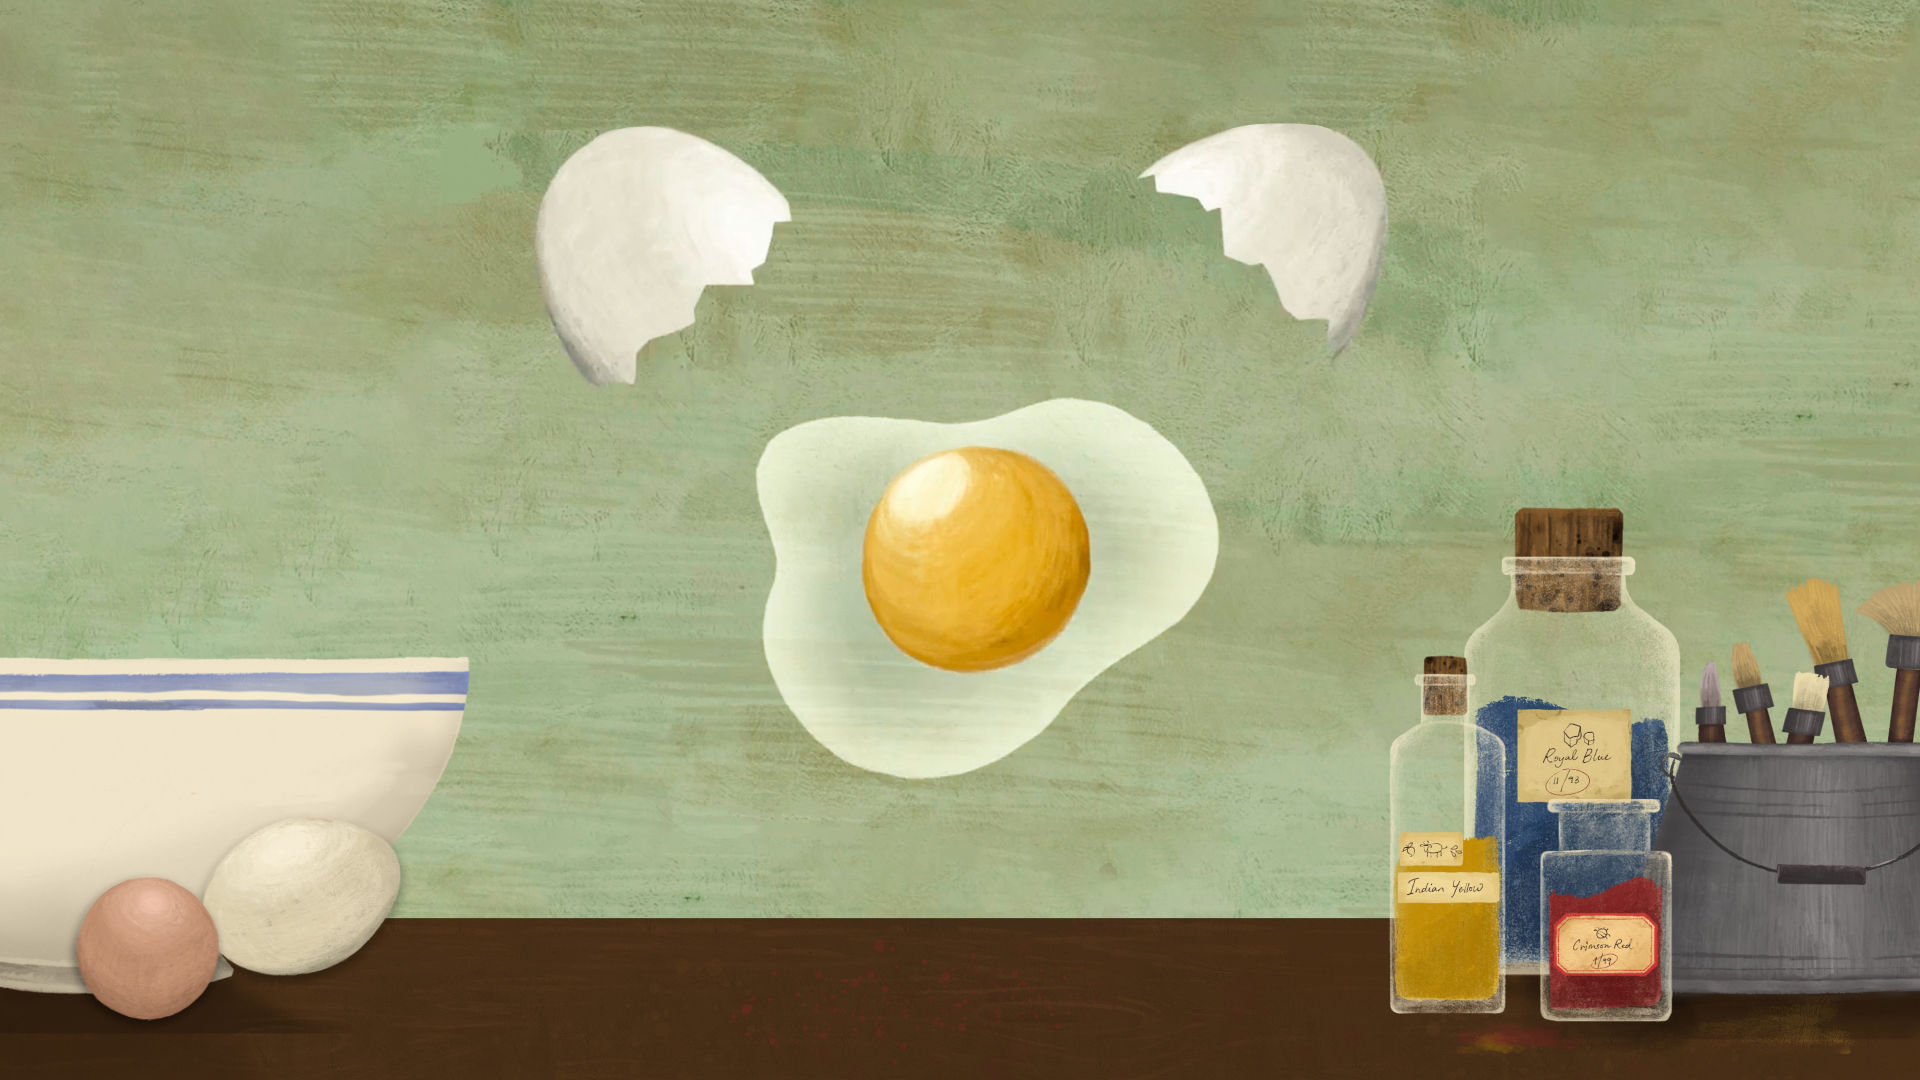 A cracked egg floats over a table top surface featuring a bowl and whole eggs as well as a bucket of paint brushes and bottles of blue, yellow, and red pigments.